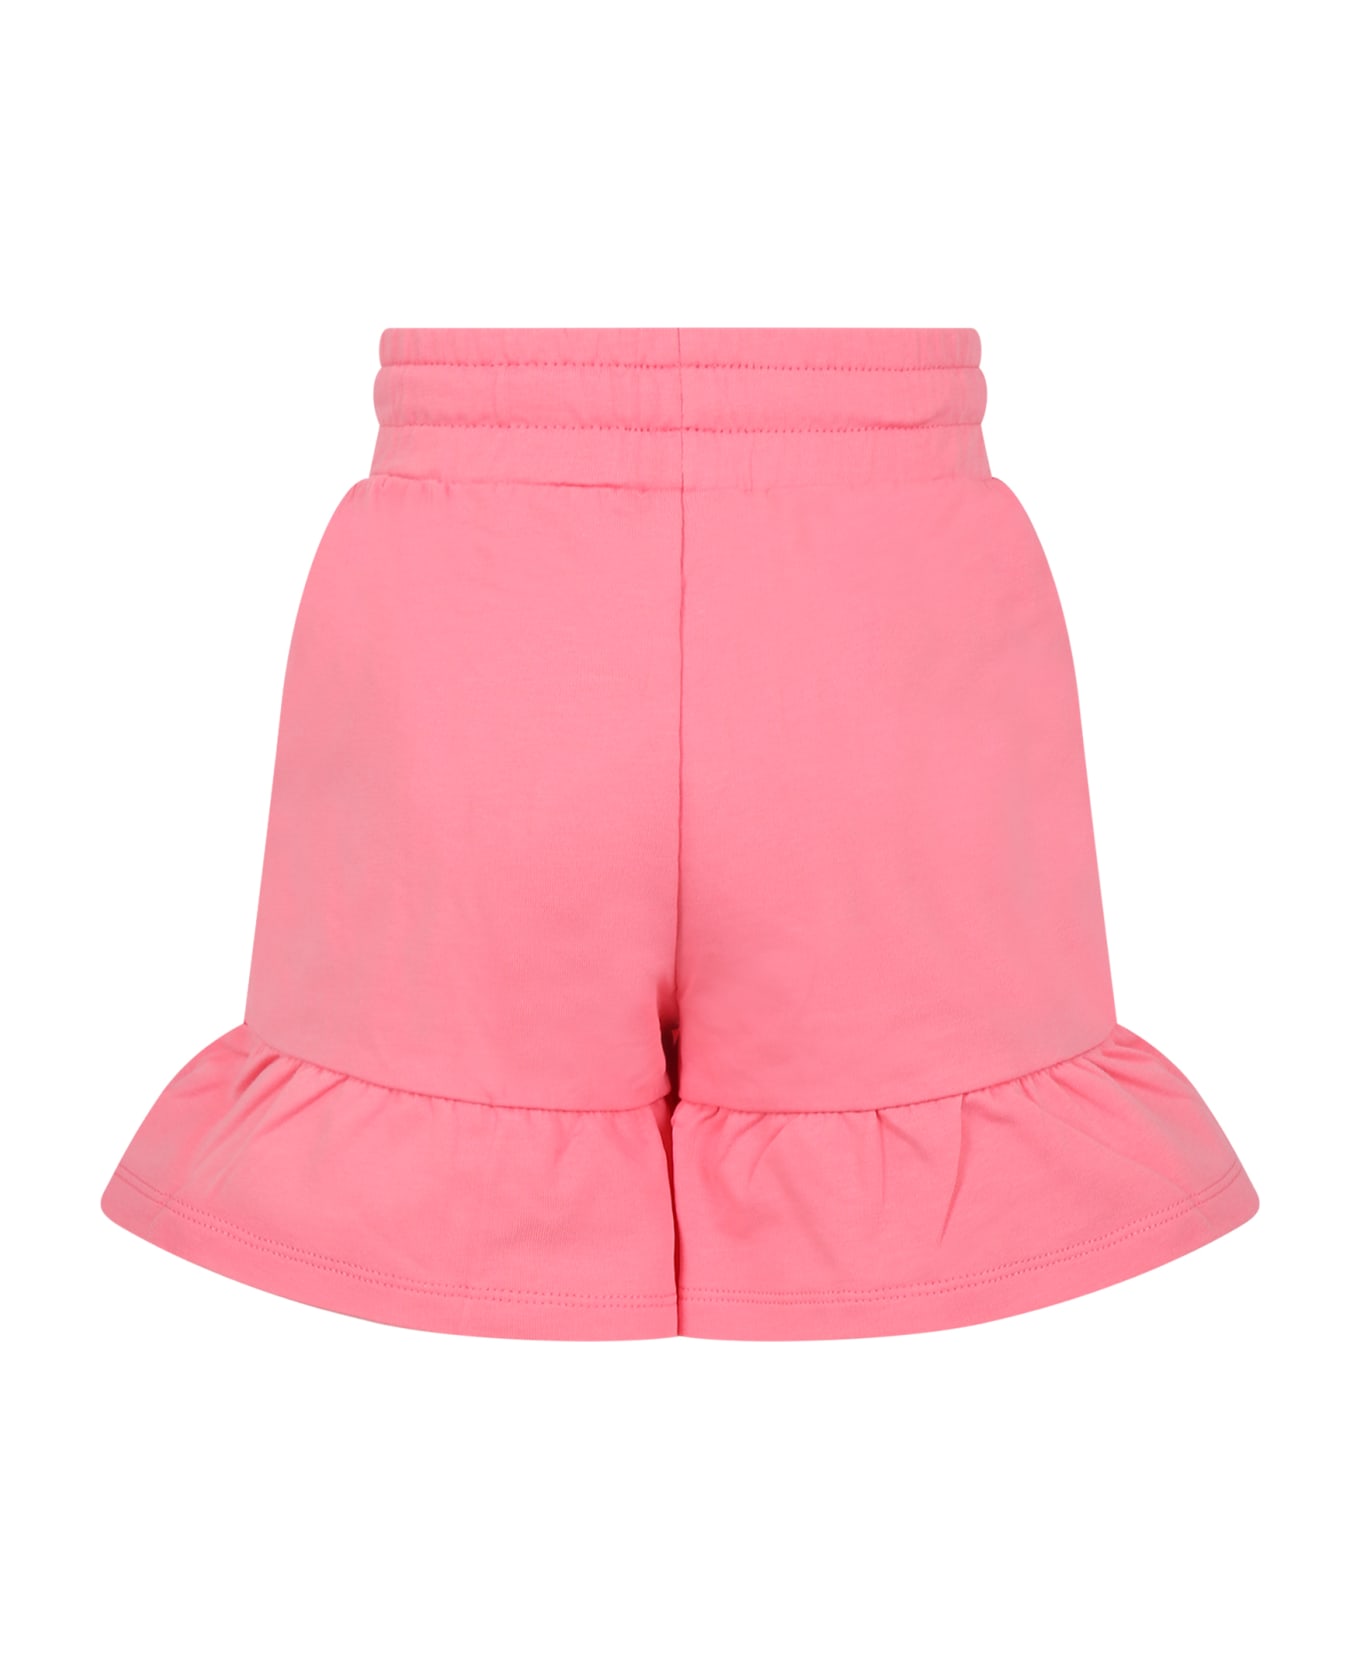 Moschino Pink Shorts For Gilr With Teddy Bera And Flowers - Light Blue